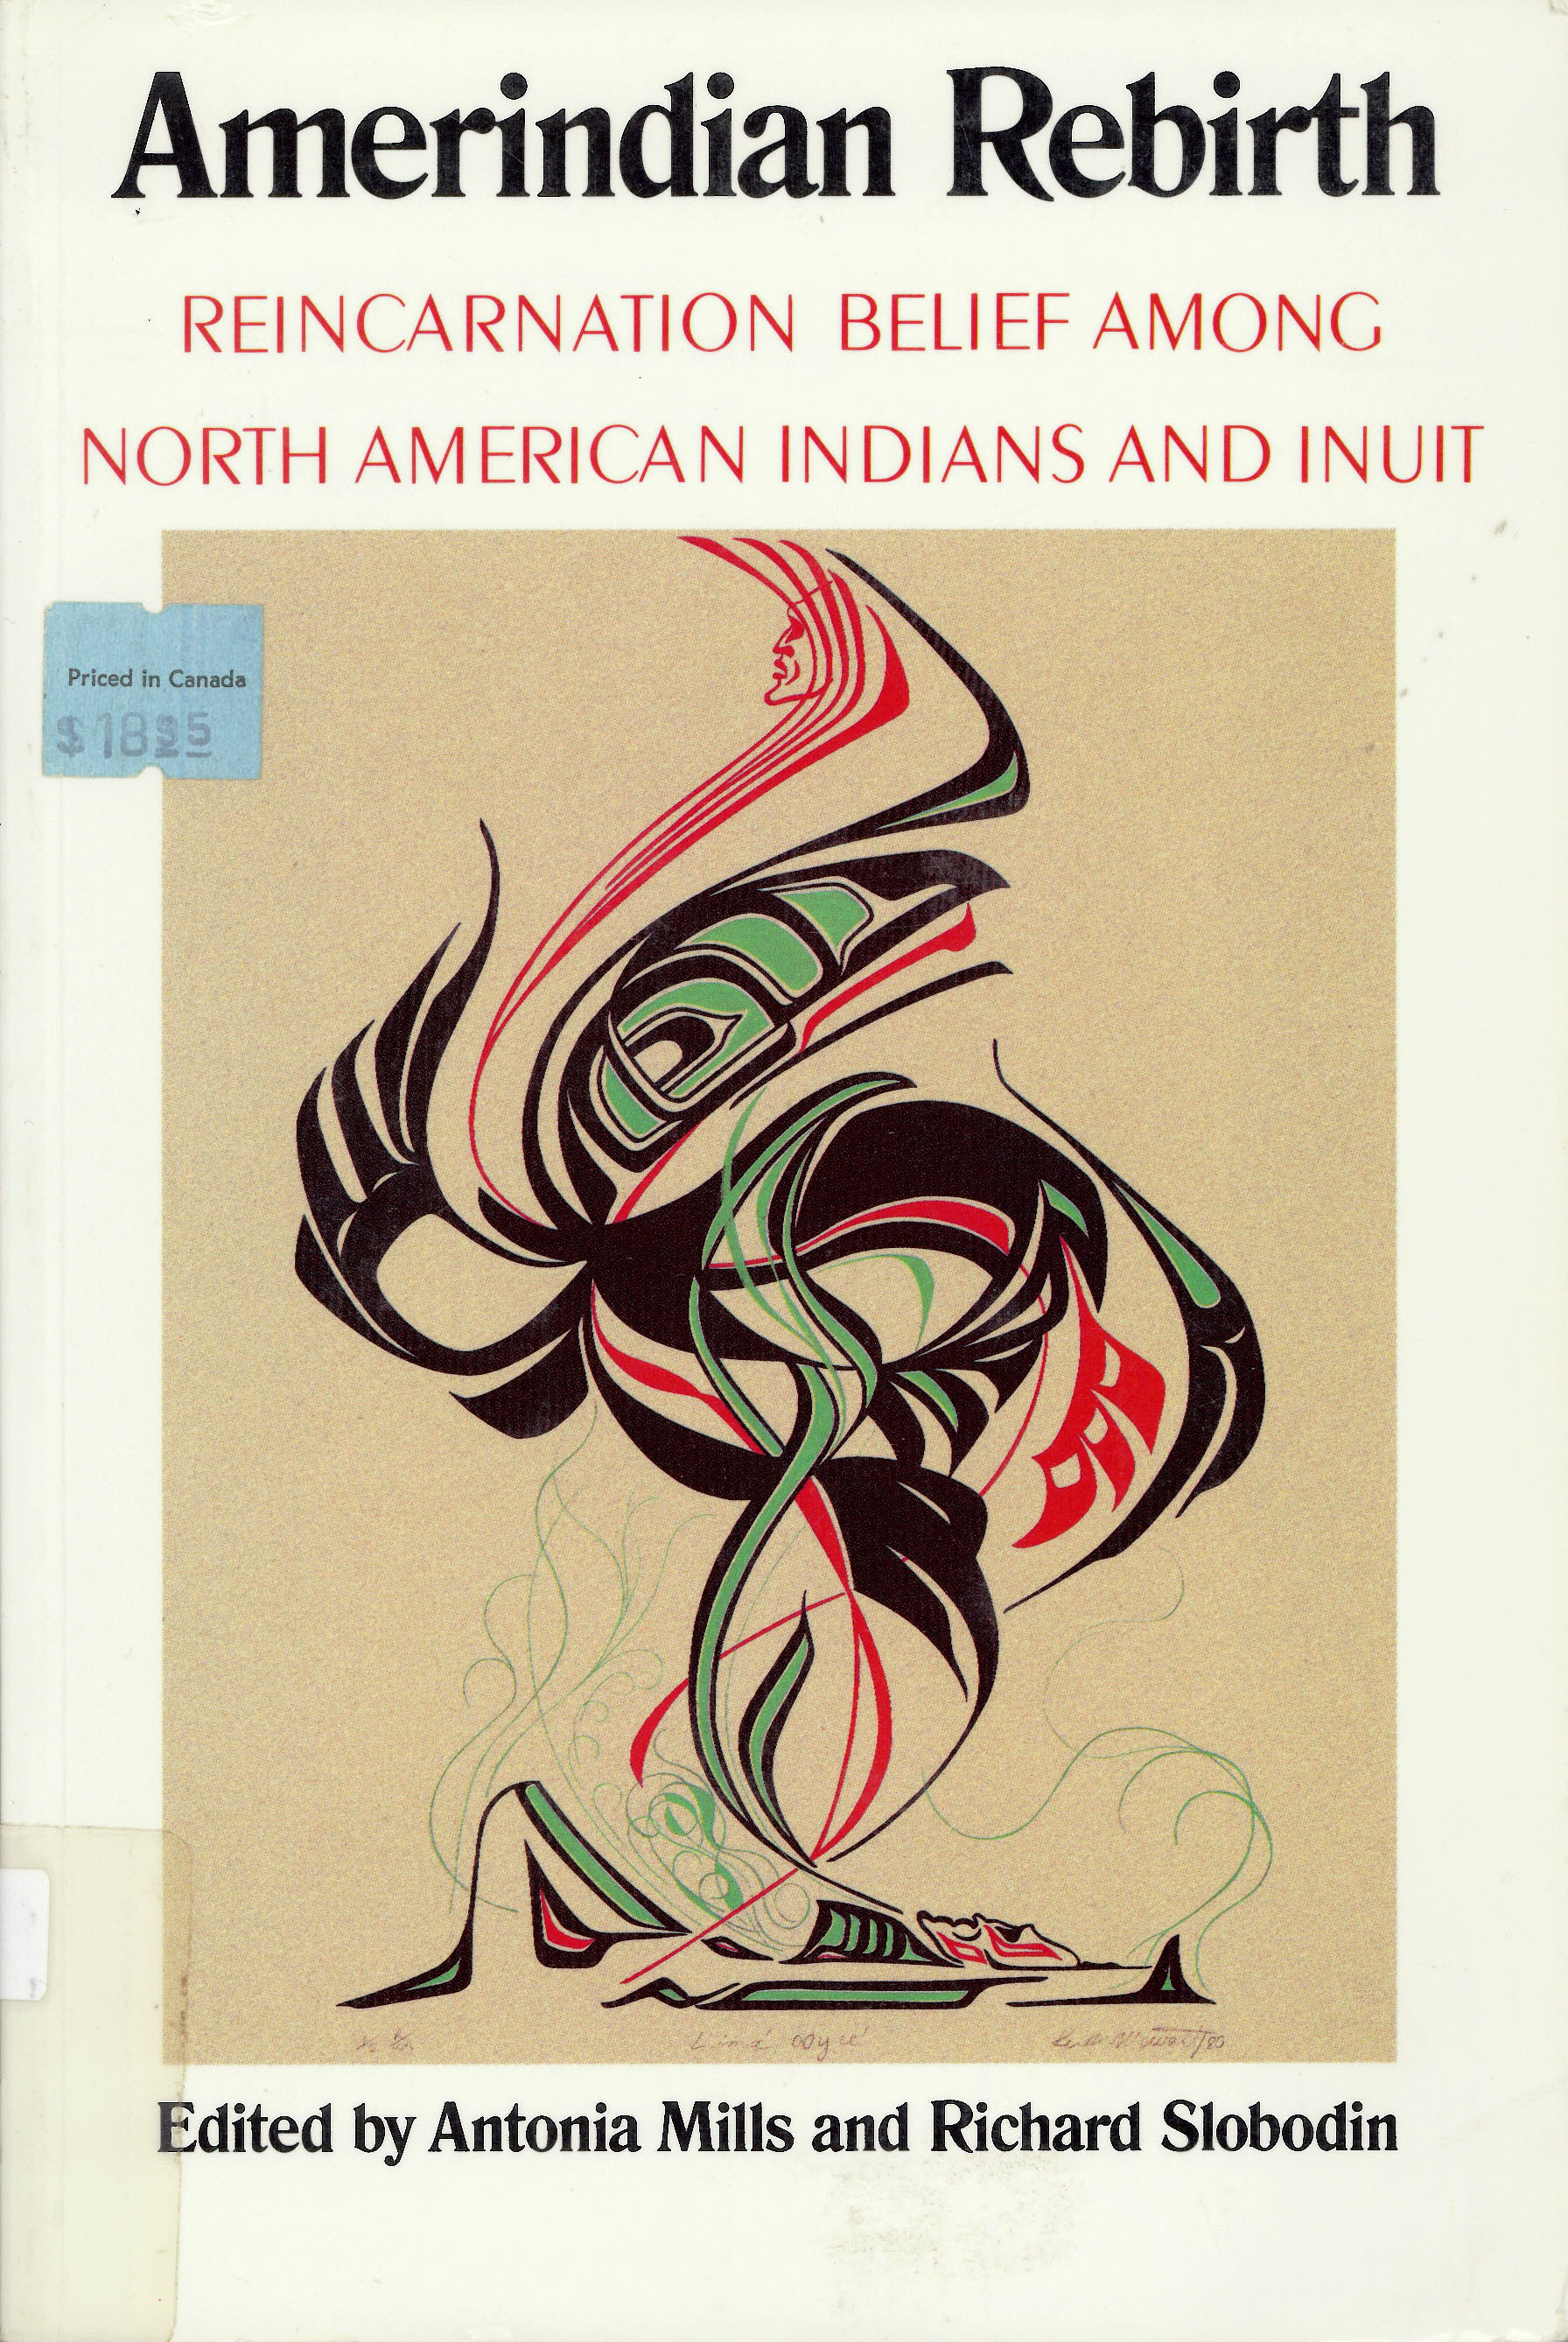 Amerindian rebirth : reincarnation belief among North American Indians and Inuit